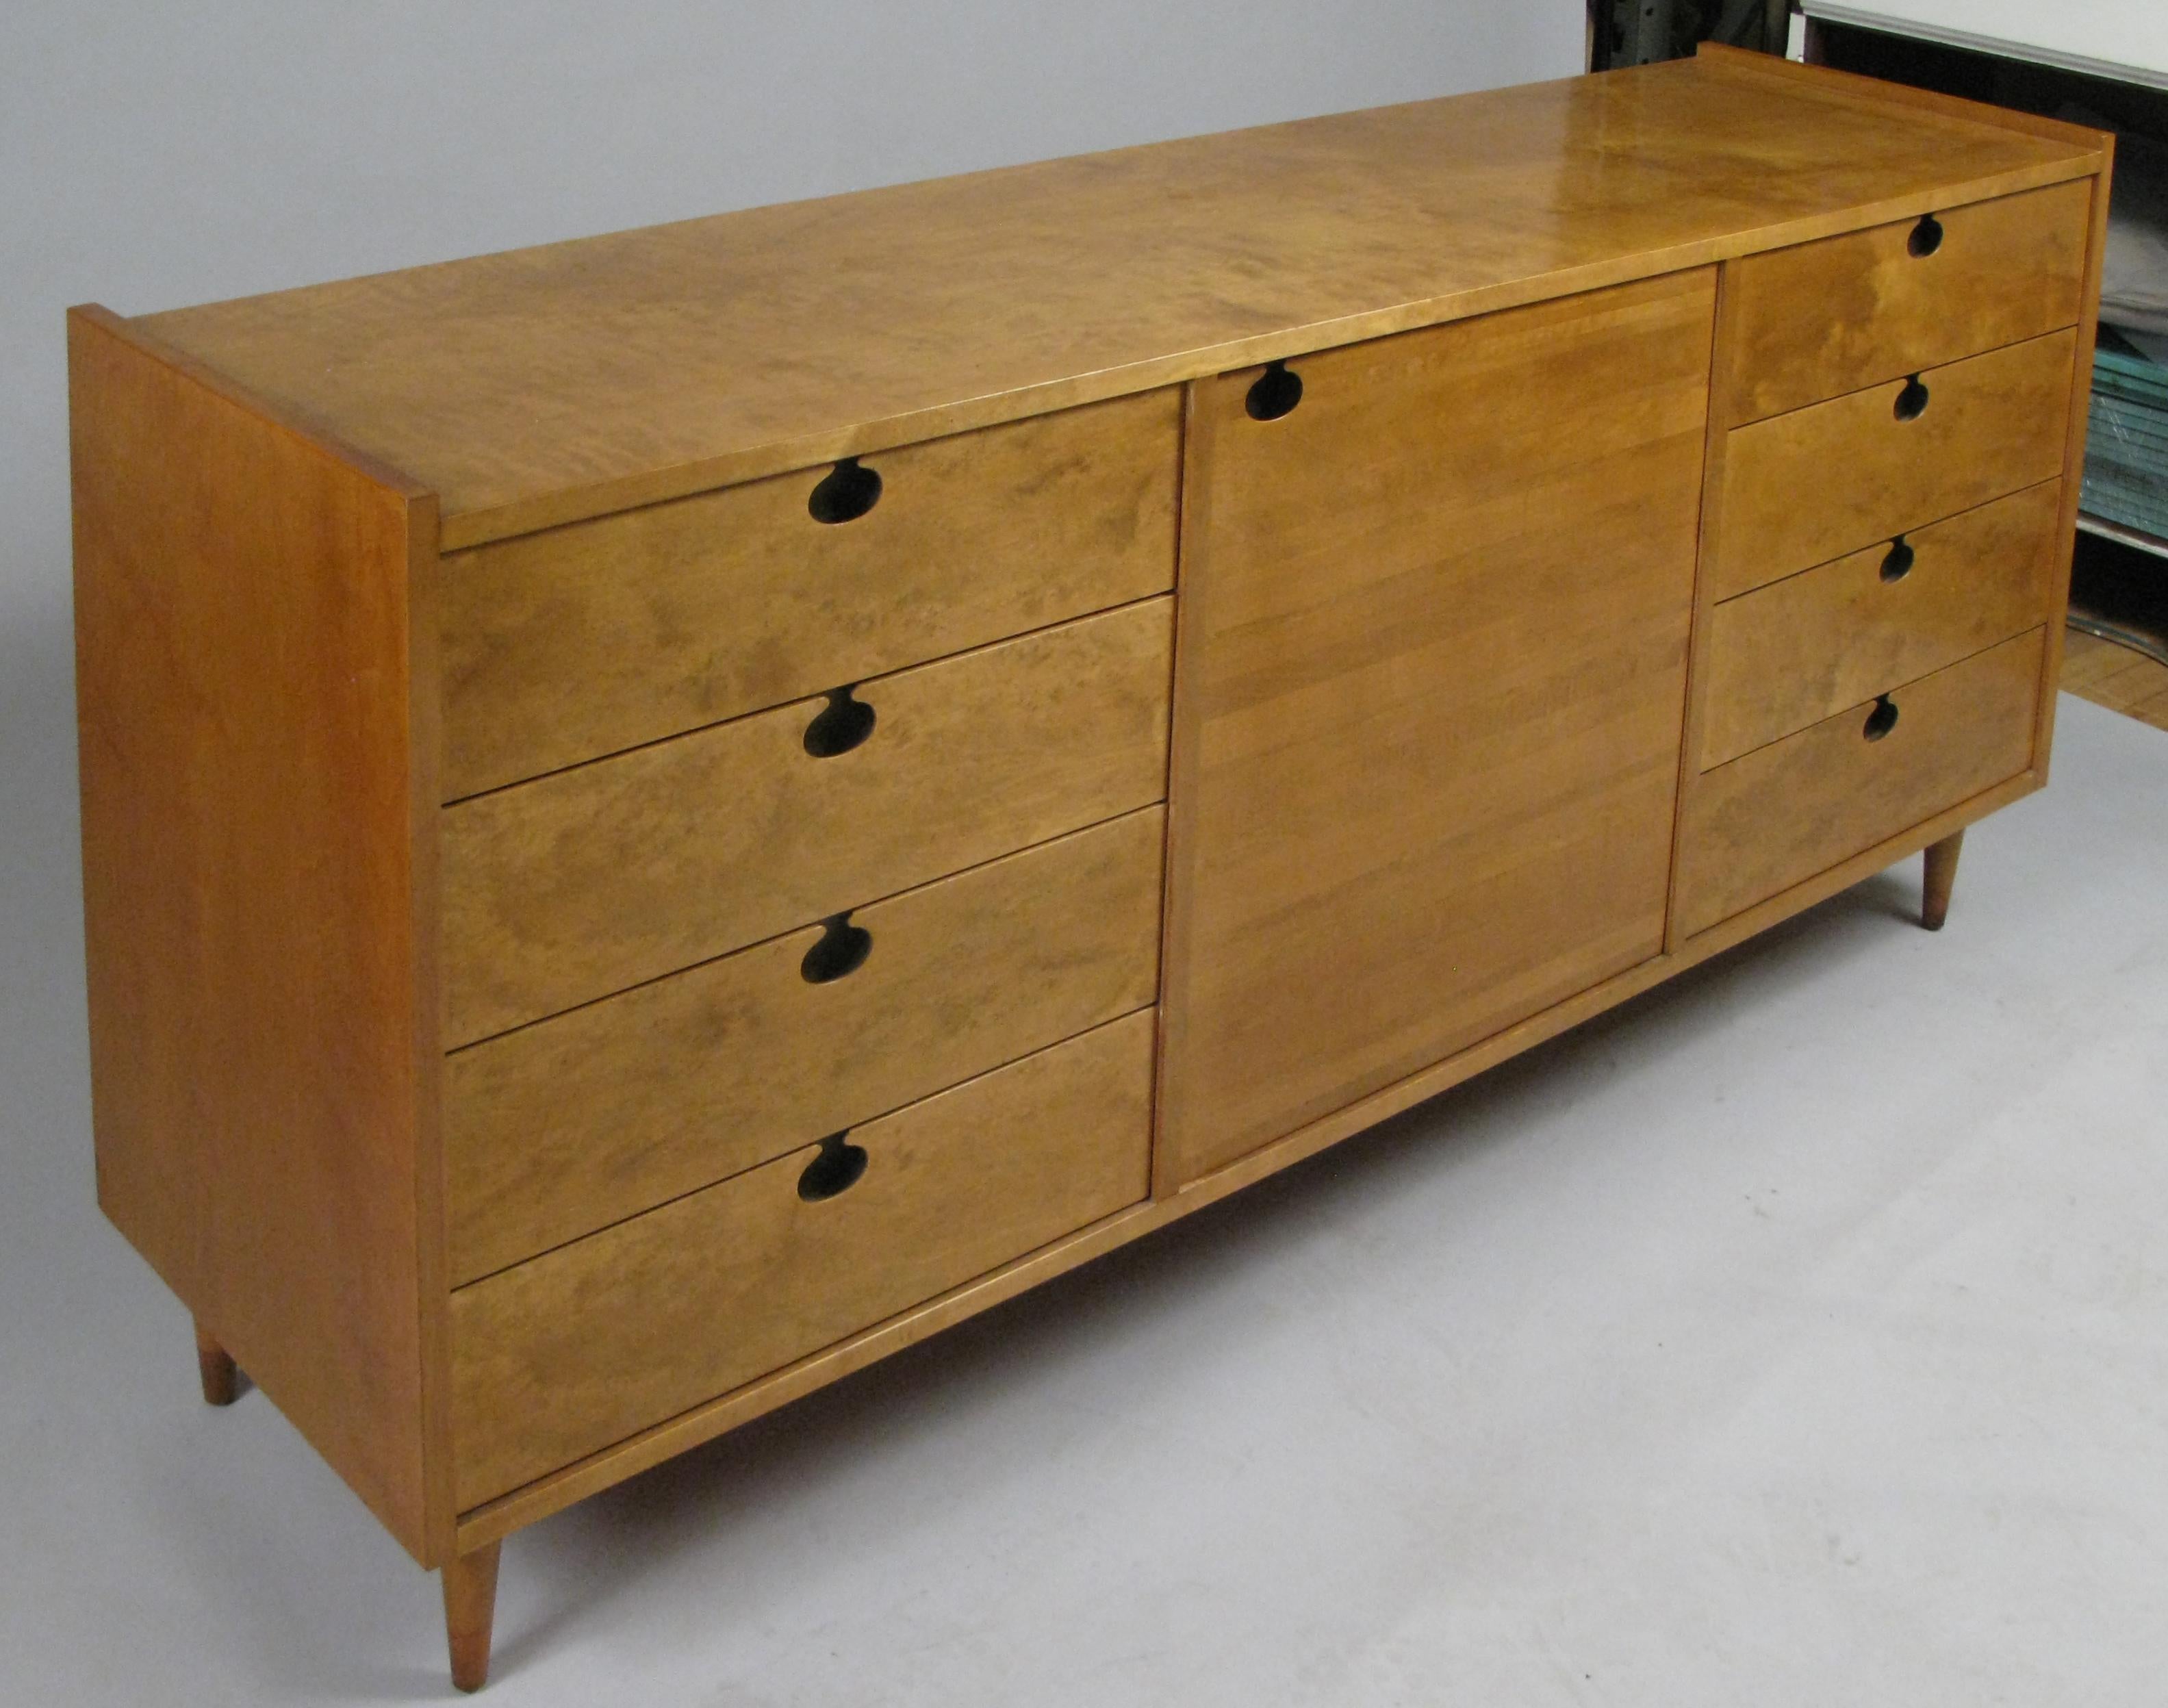 Mid-Century Modern 1950s Cabinet / Sideboard in Maple and Brass by Edmund Spence